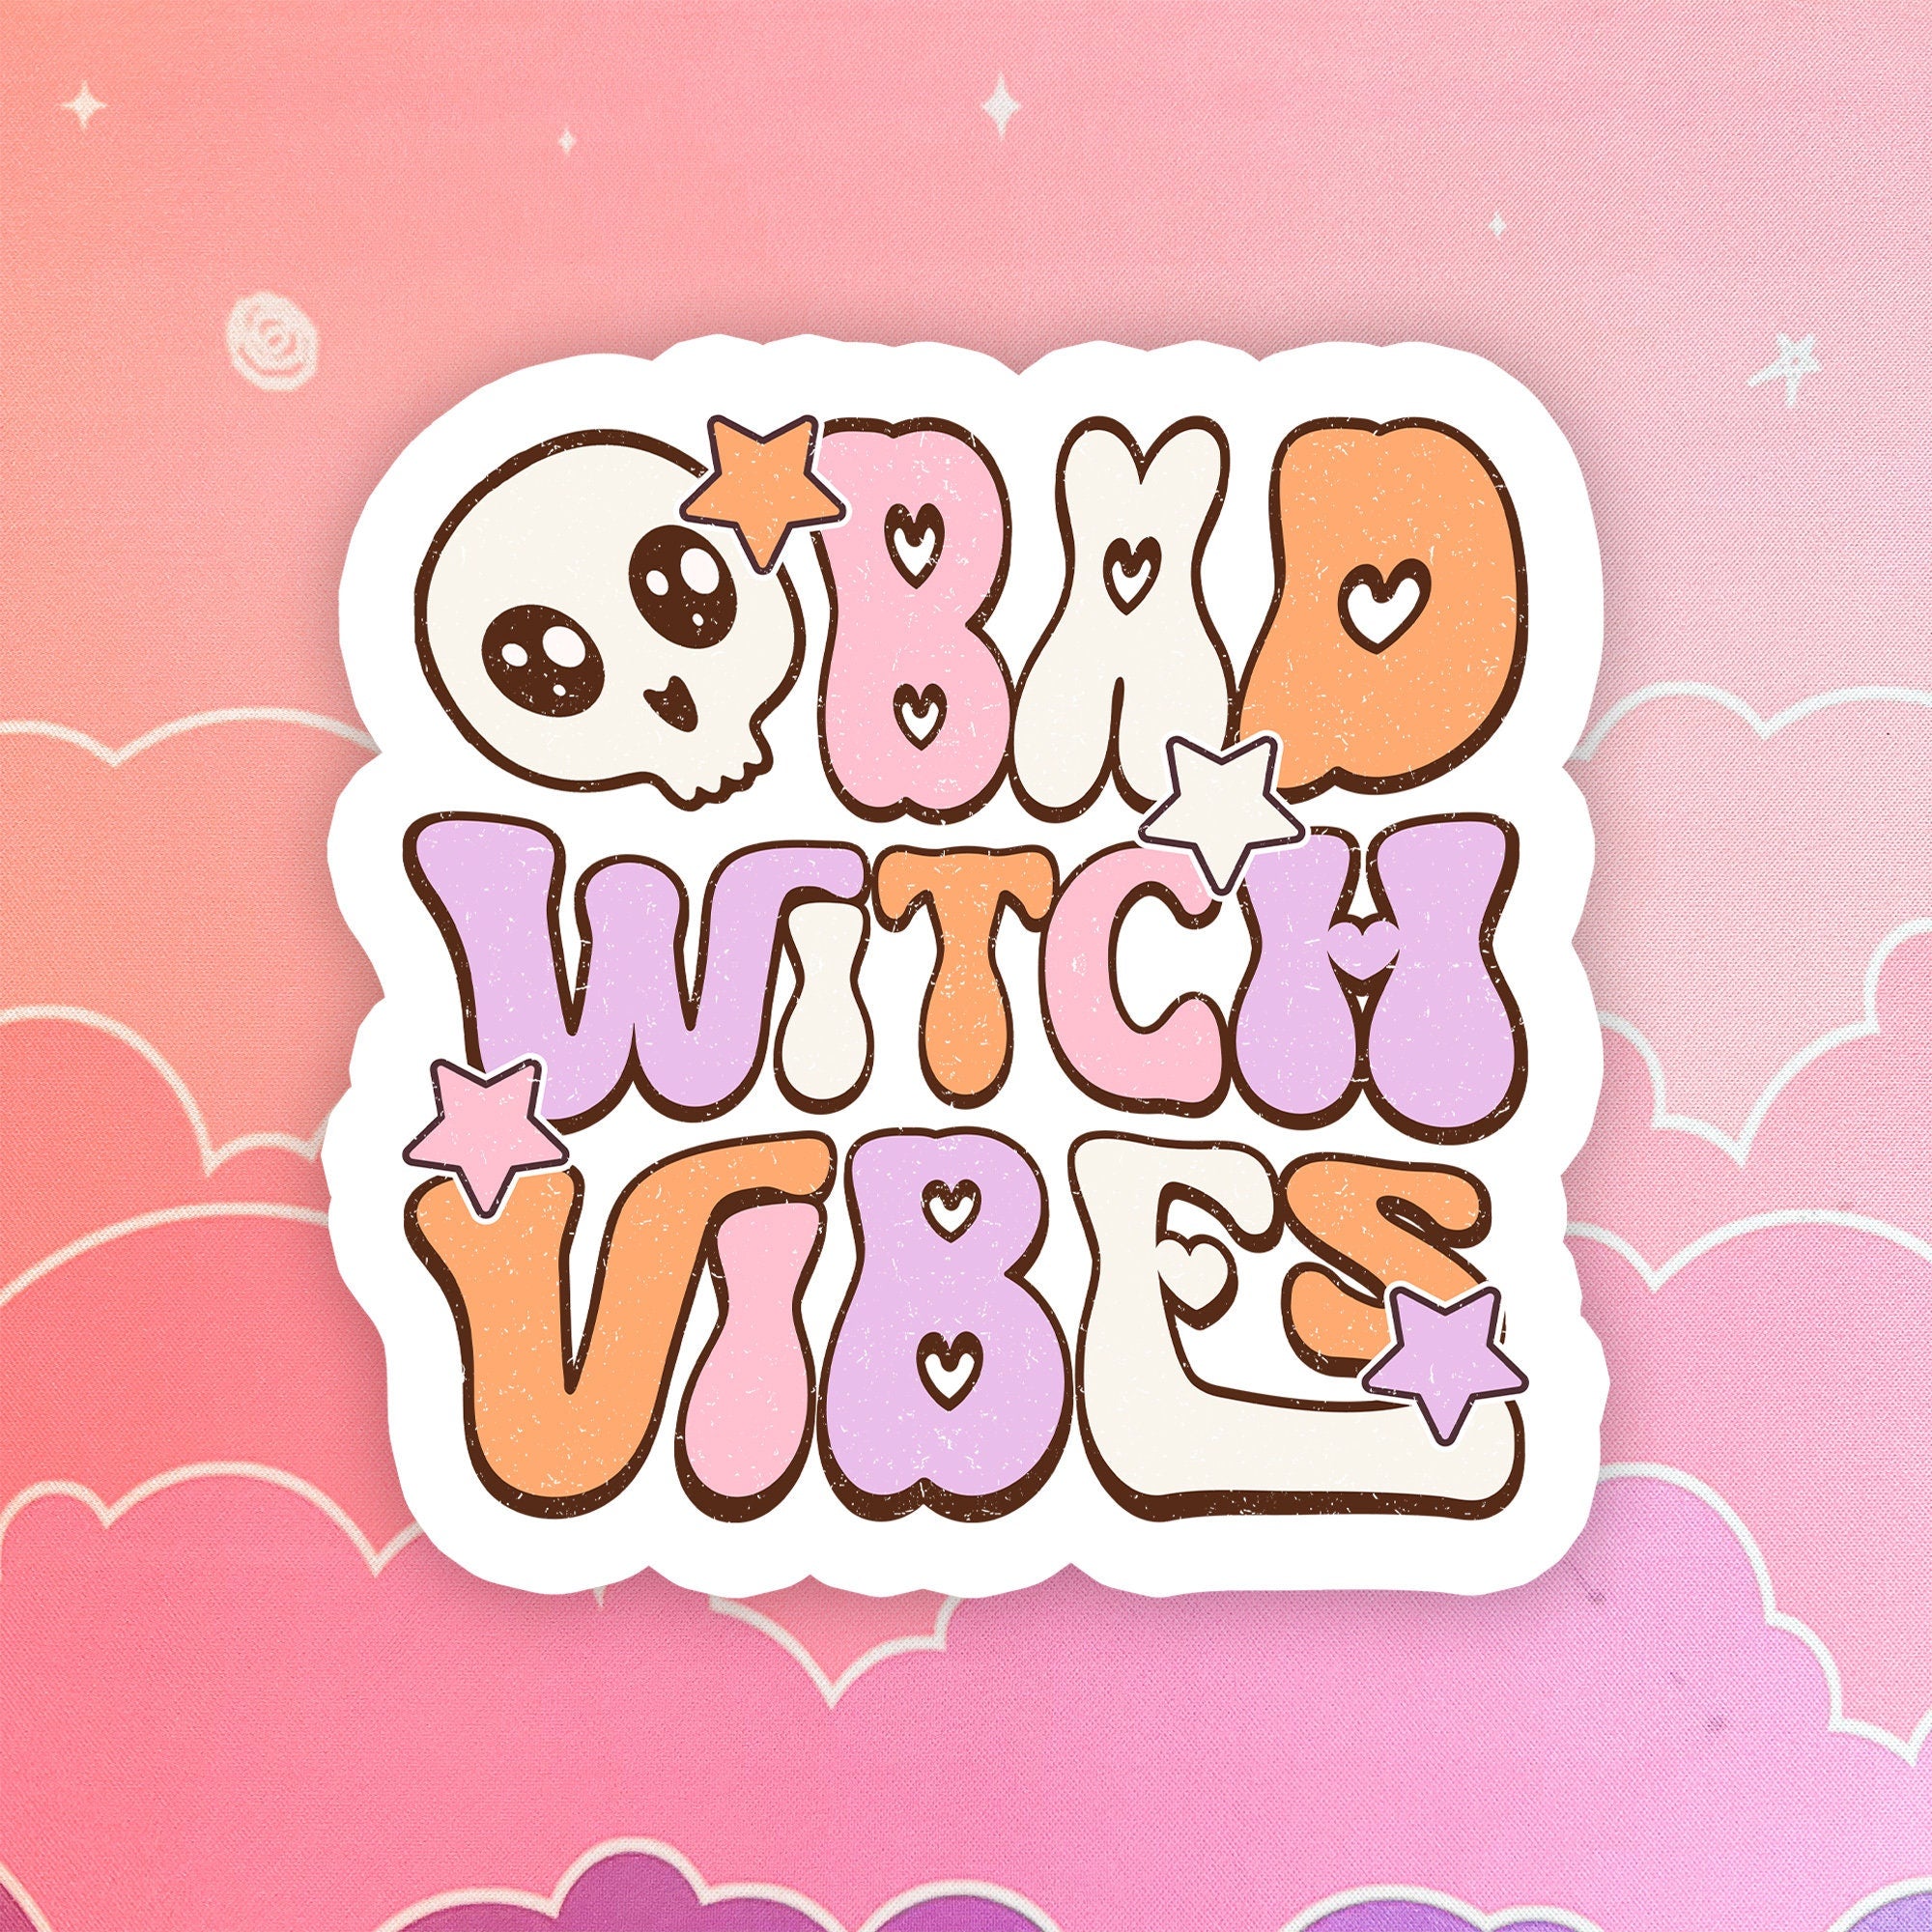 Bad Witch Vibes Sticker, witchy good vibes, spiritual, laptop, sarcastic, kindle, punny stickers, HydroFlask Stickers, bookish, book lover